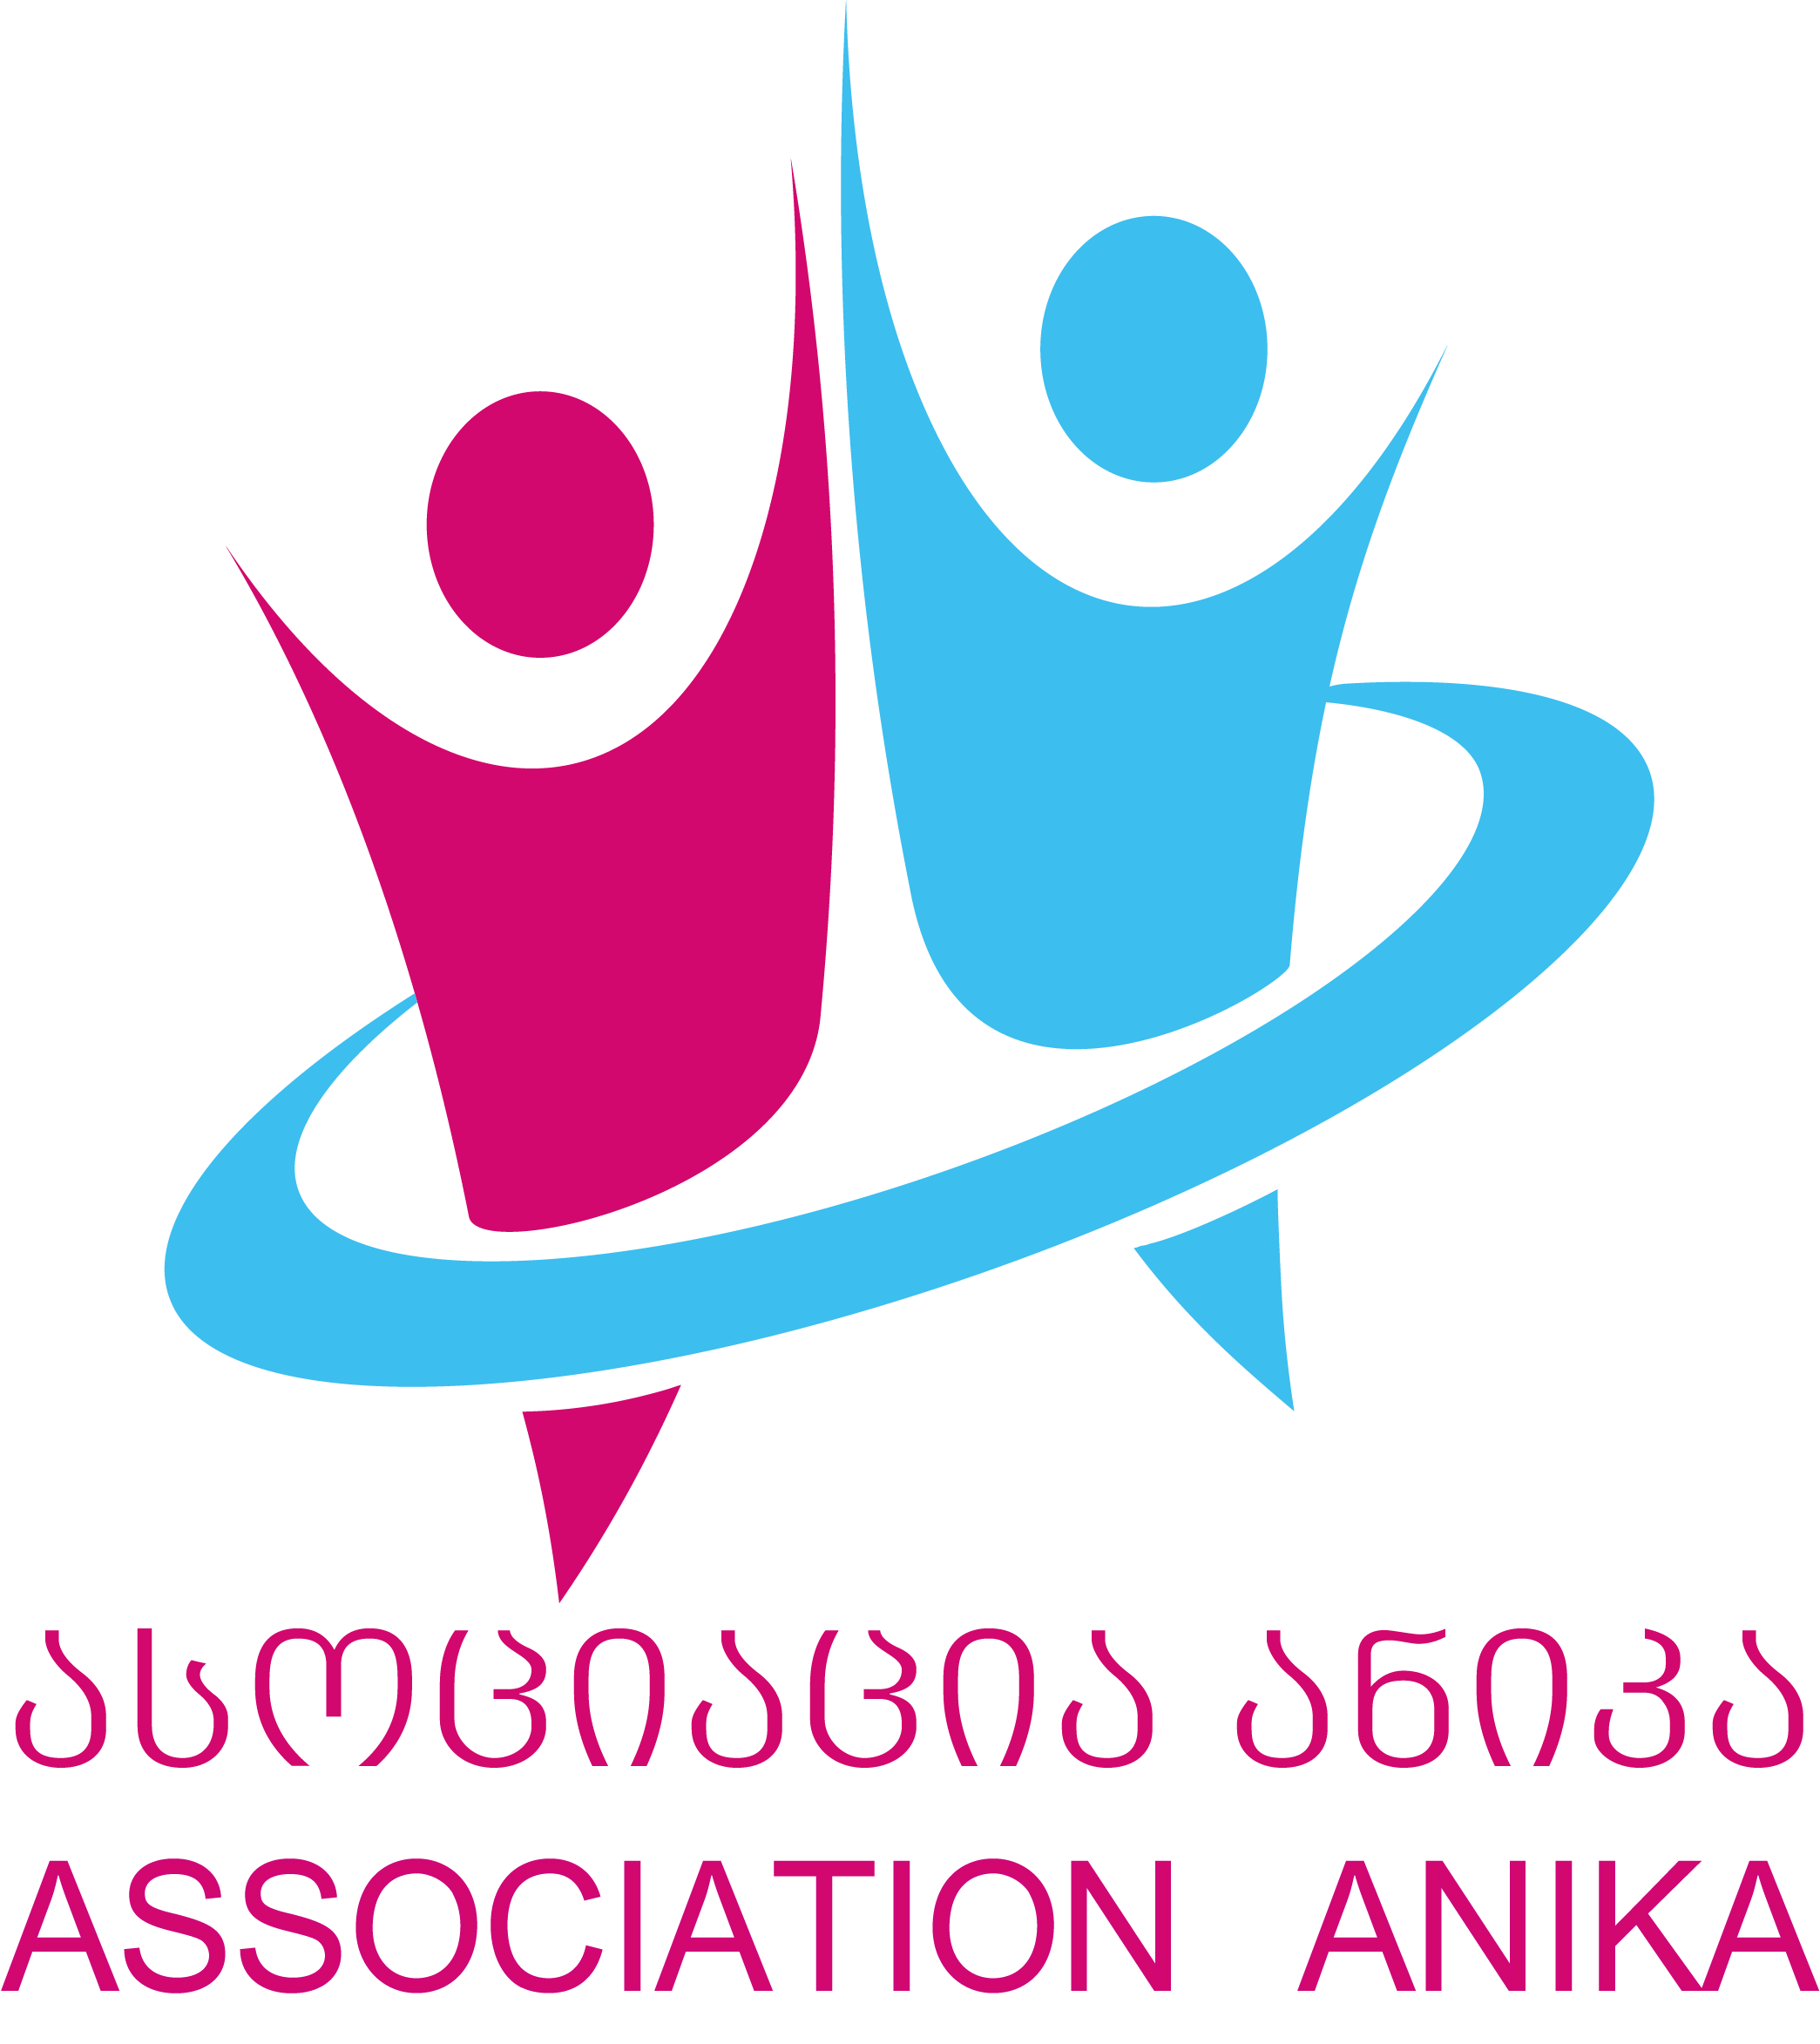 Association Anika logo. Two abstract figures, one in pink and one in blue, high-fiving as a blue swooping ring envelopes them at the waist.